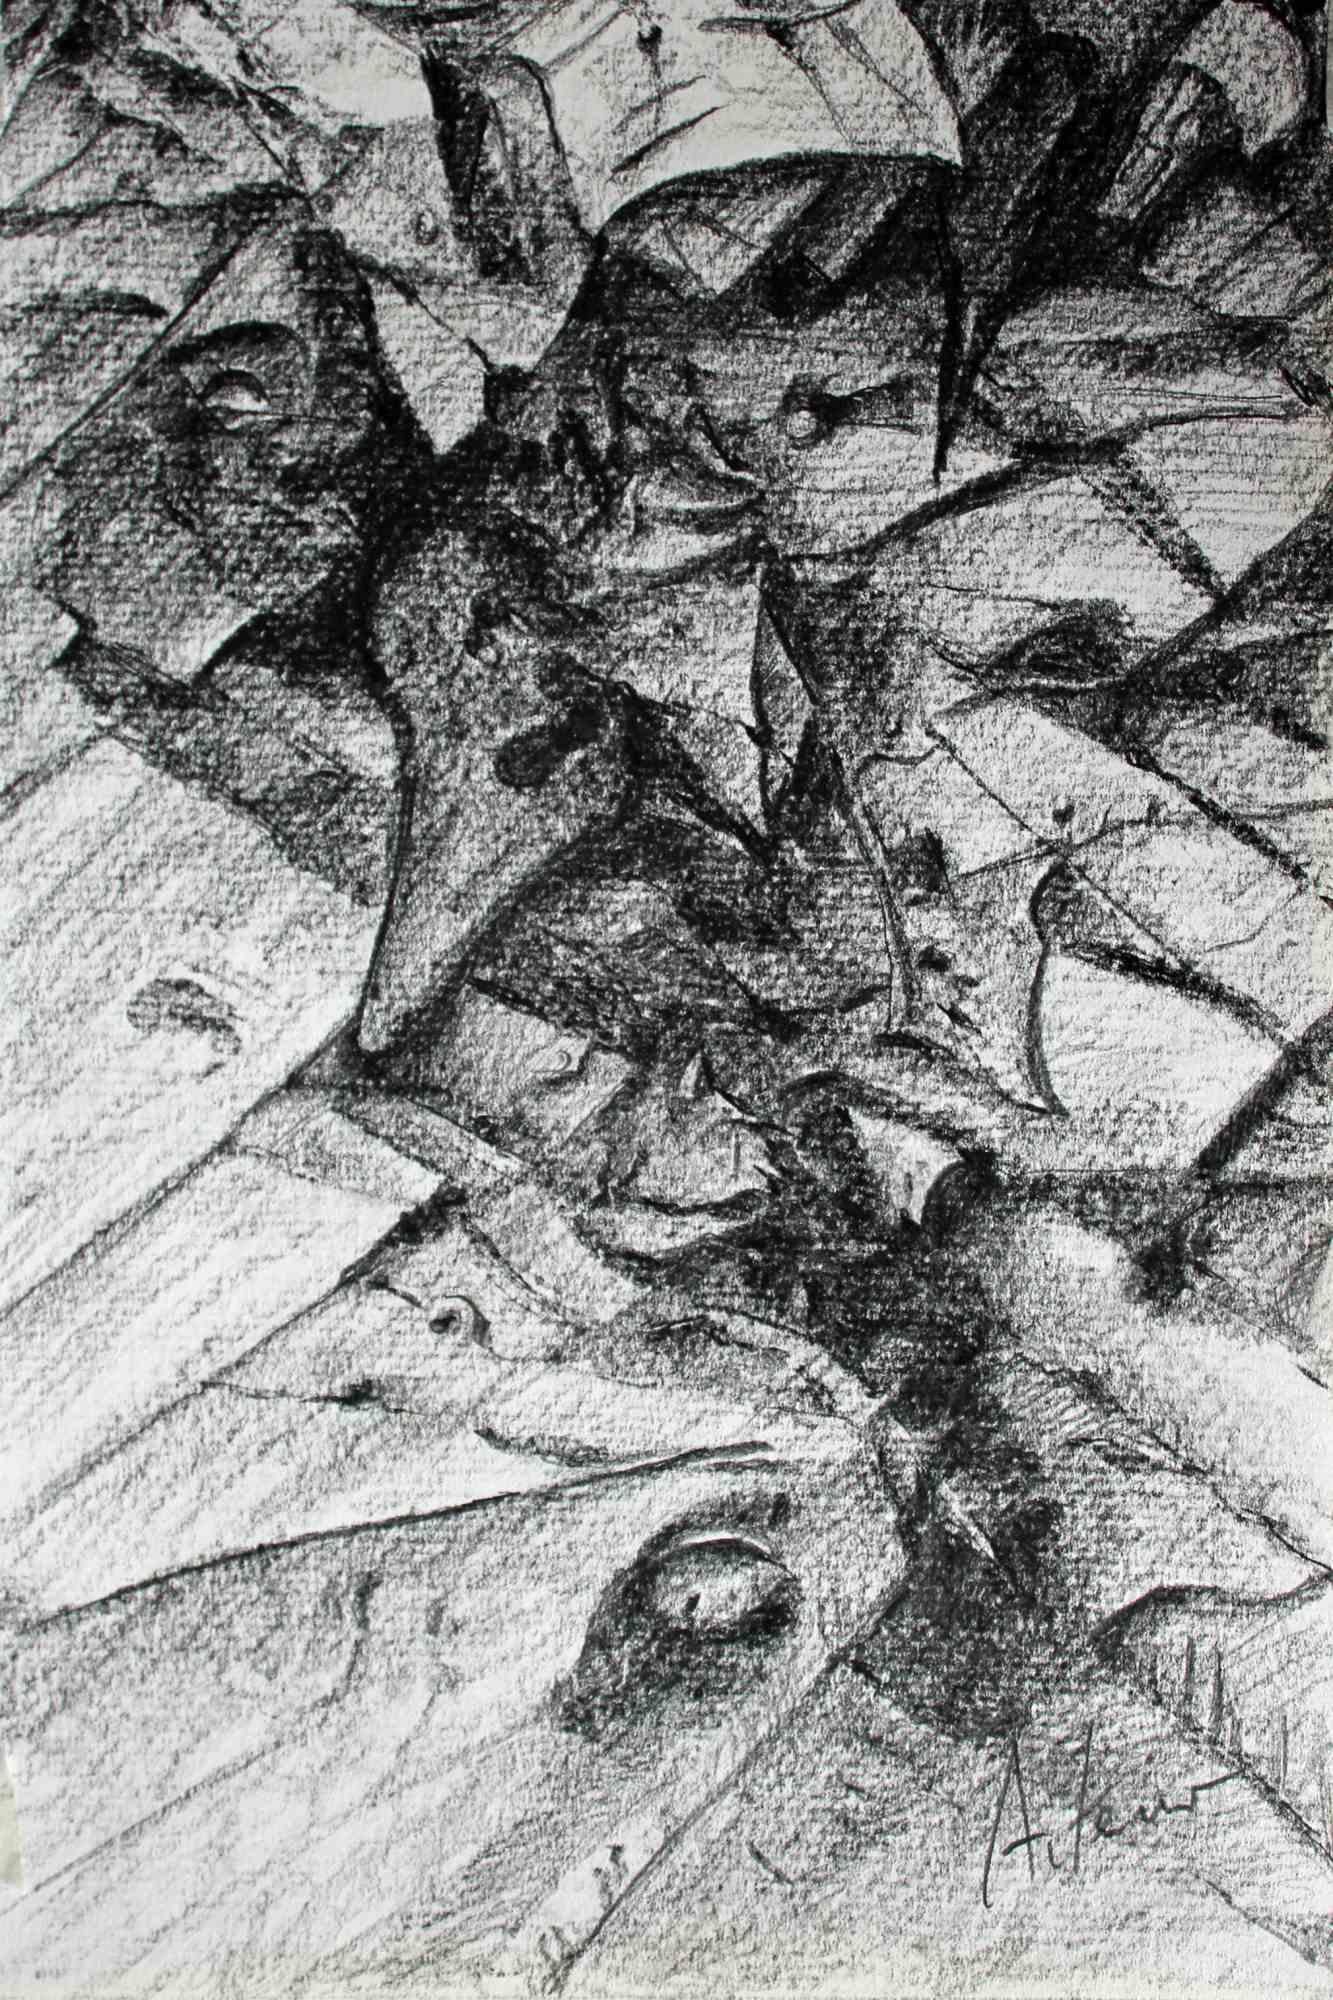 The graphic work "Surreal landscape in drawing 2 "is part of the series "Glimpses of infinity" and consists of three drawings measuring 20 × 30 cm by artist Artemio Ceresa. It was created in 2018. The technique is pencil on paper and the signature